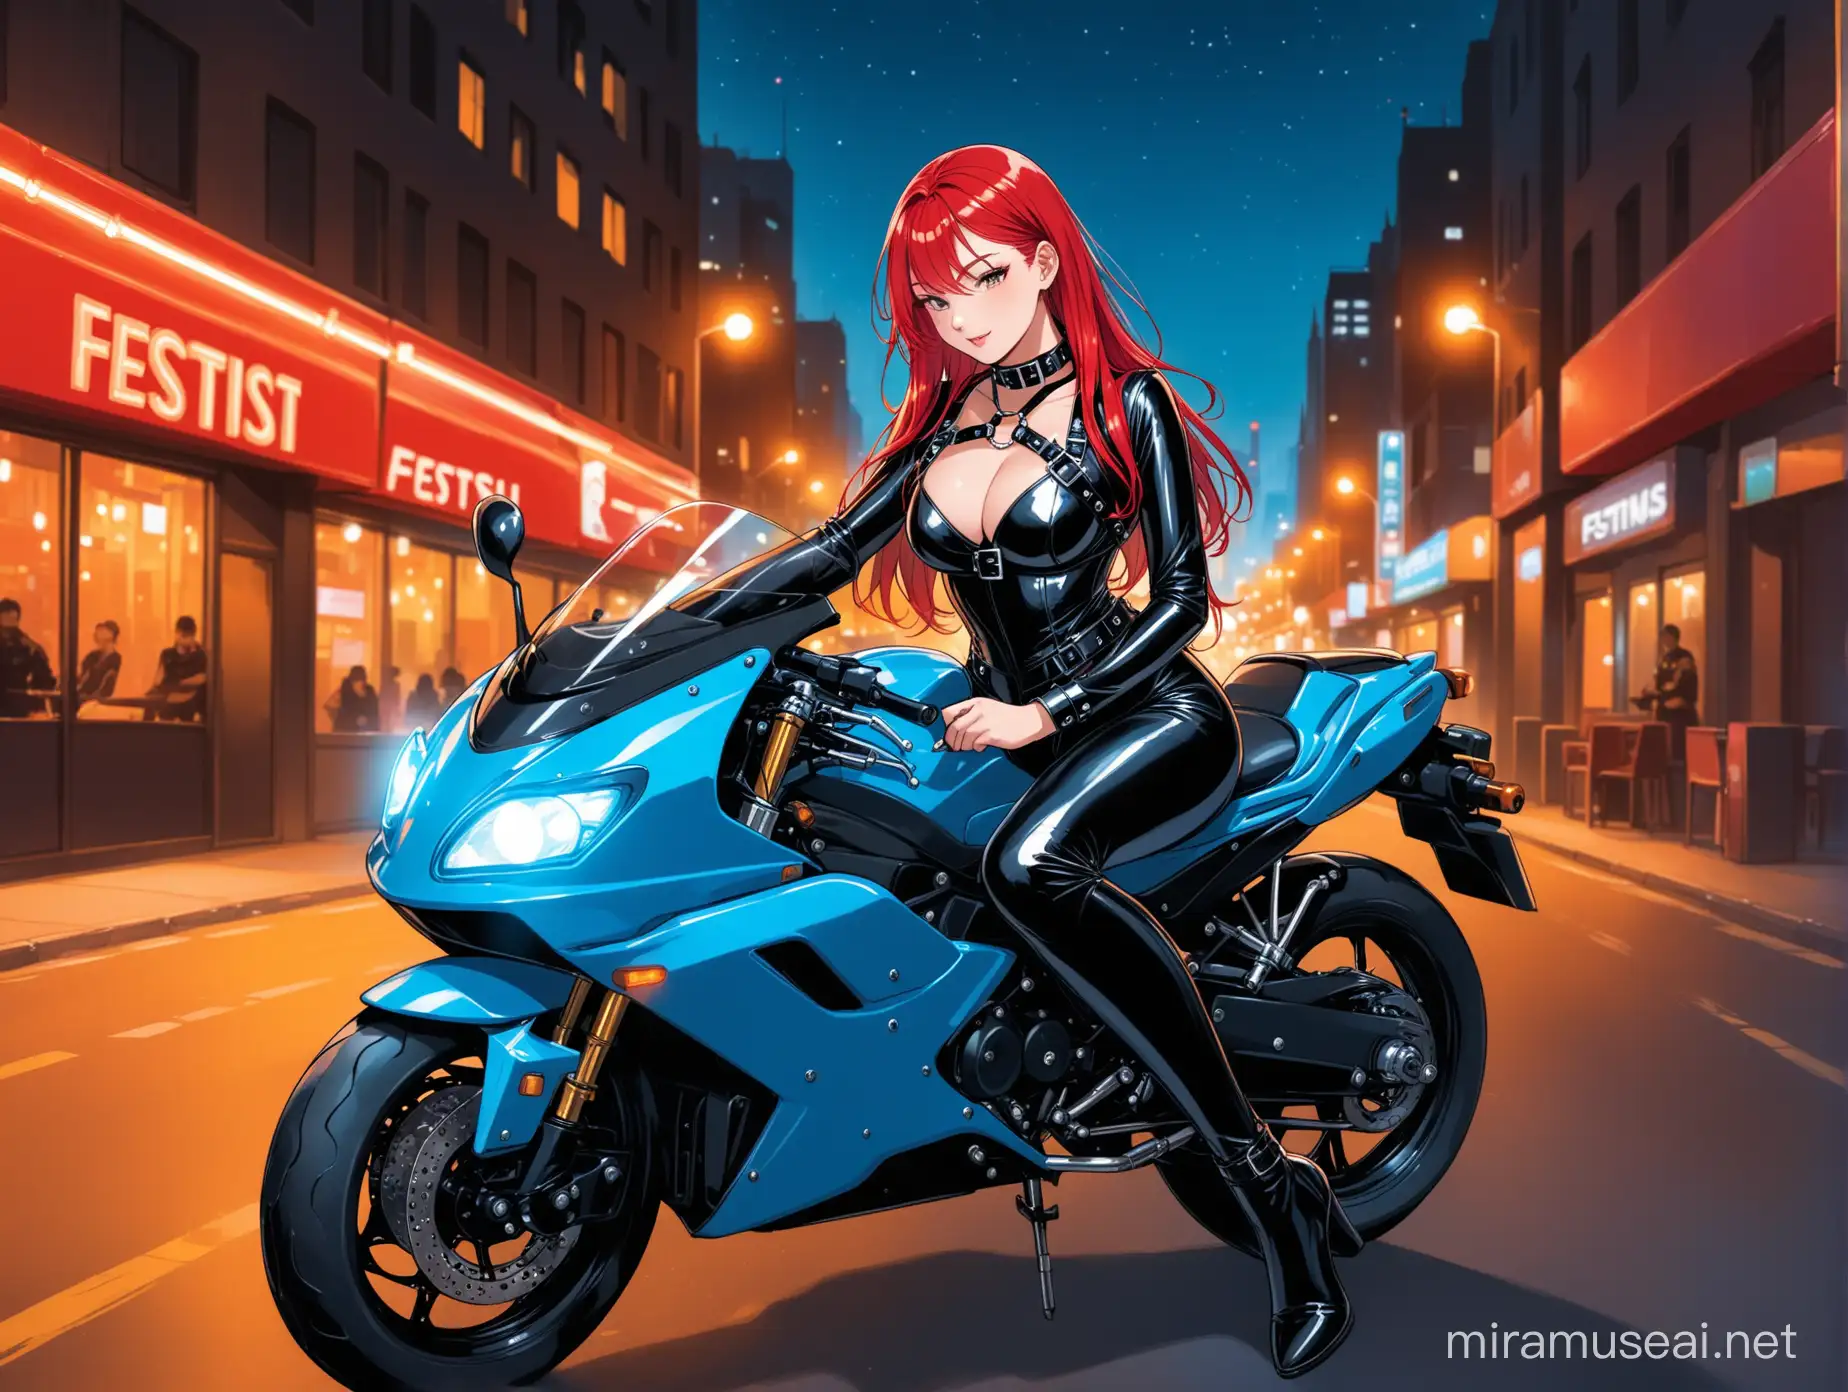 oung woman with bright red hair sitting on a blue motorbike in a city at night, wearing a shiny black rubber catsuit, a tight black corset, a steel choker collar, belt. festish harness,